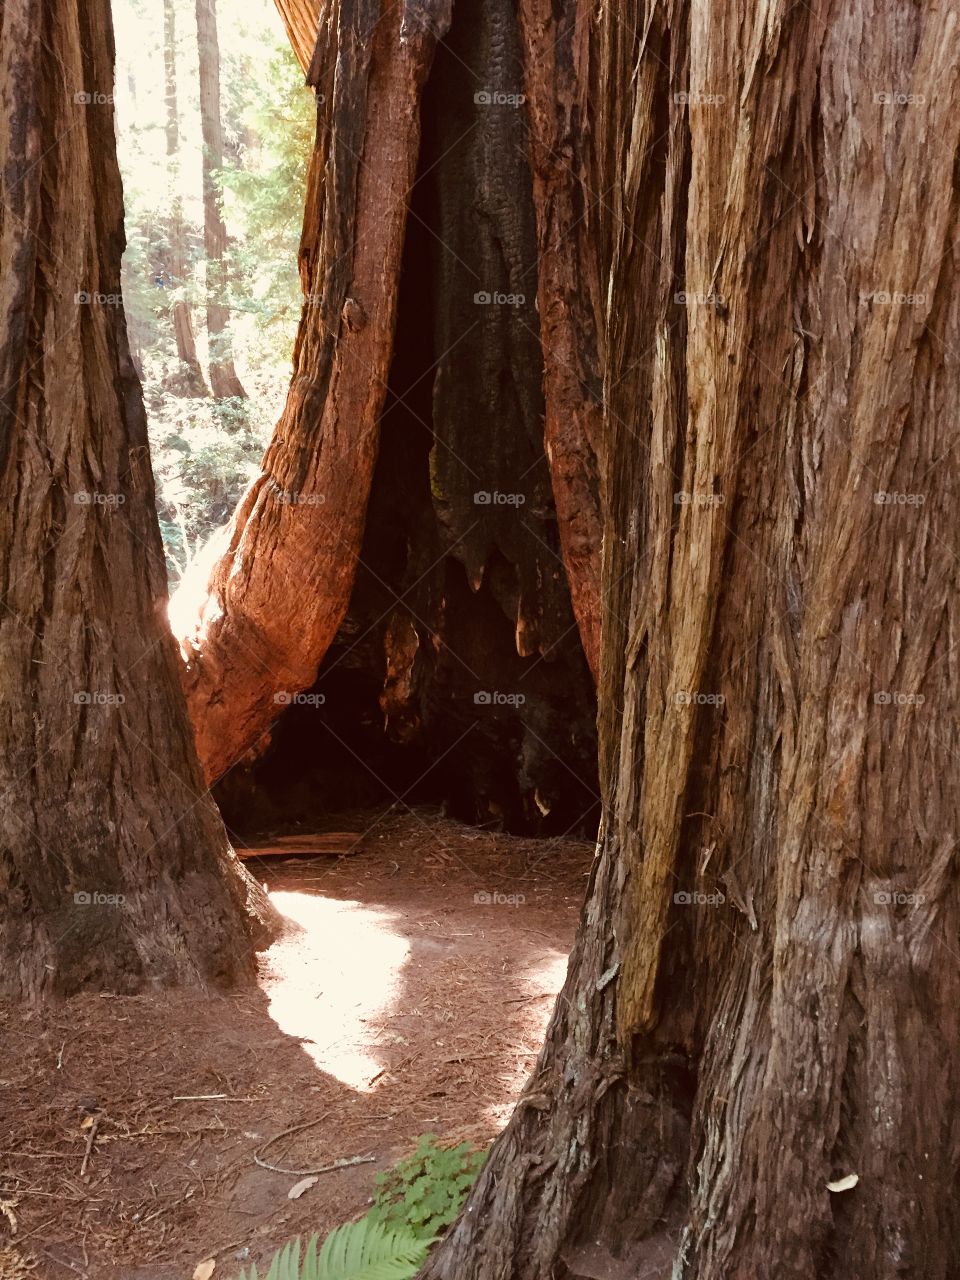 Sequoia that has seen many, many years